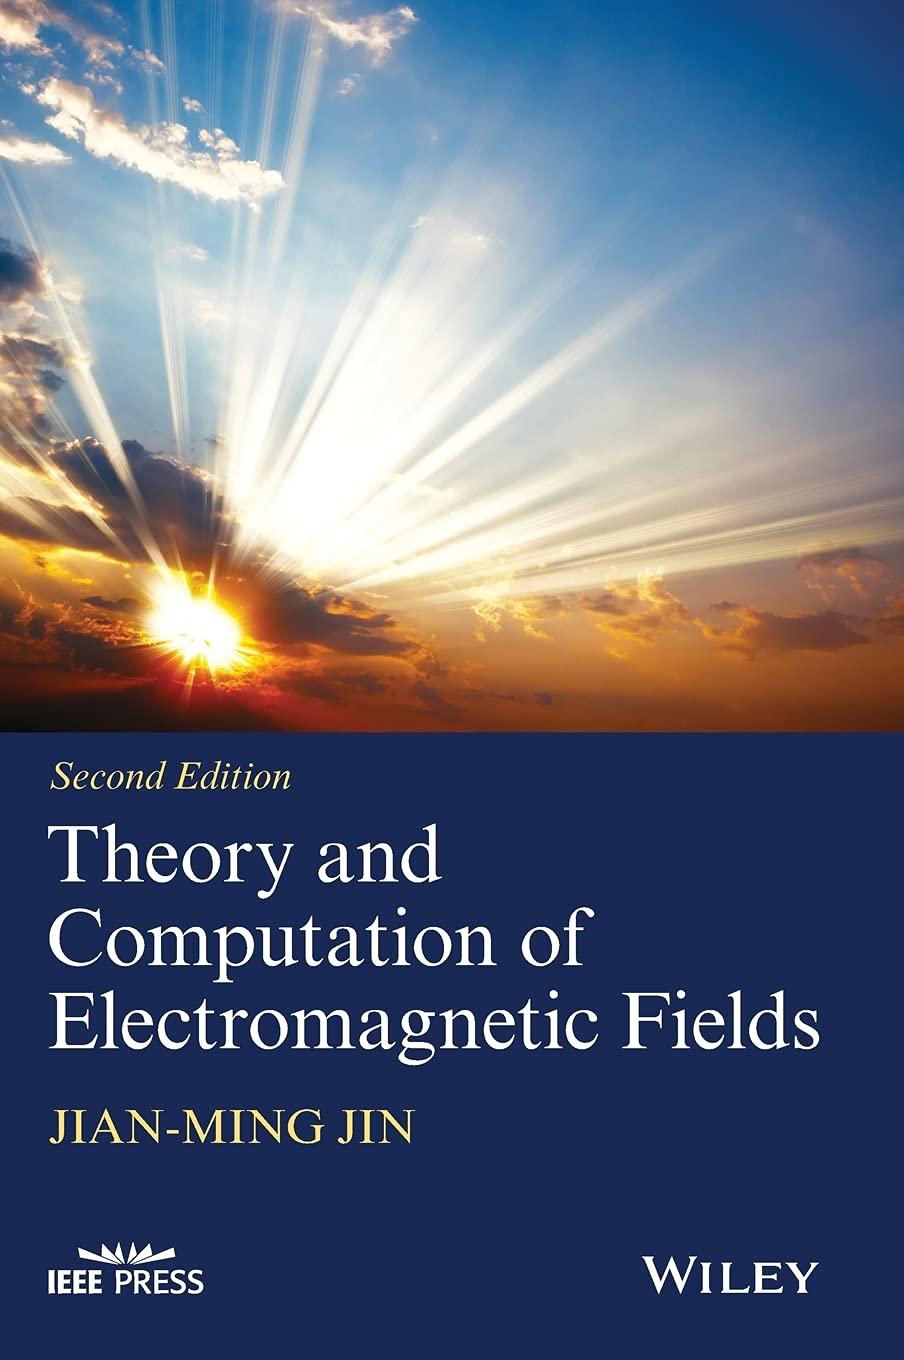 theory and computation of electromagnetic fields 2nd edition jian-ming jin 1119108047, 9781119108047